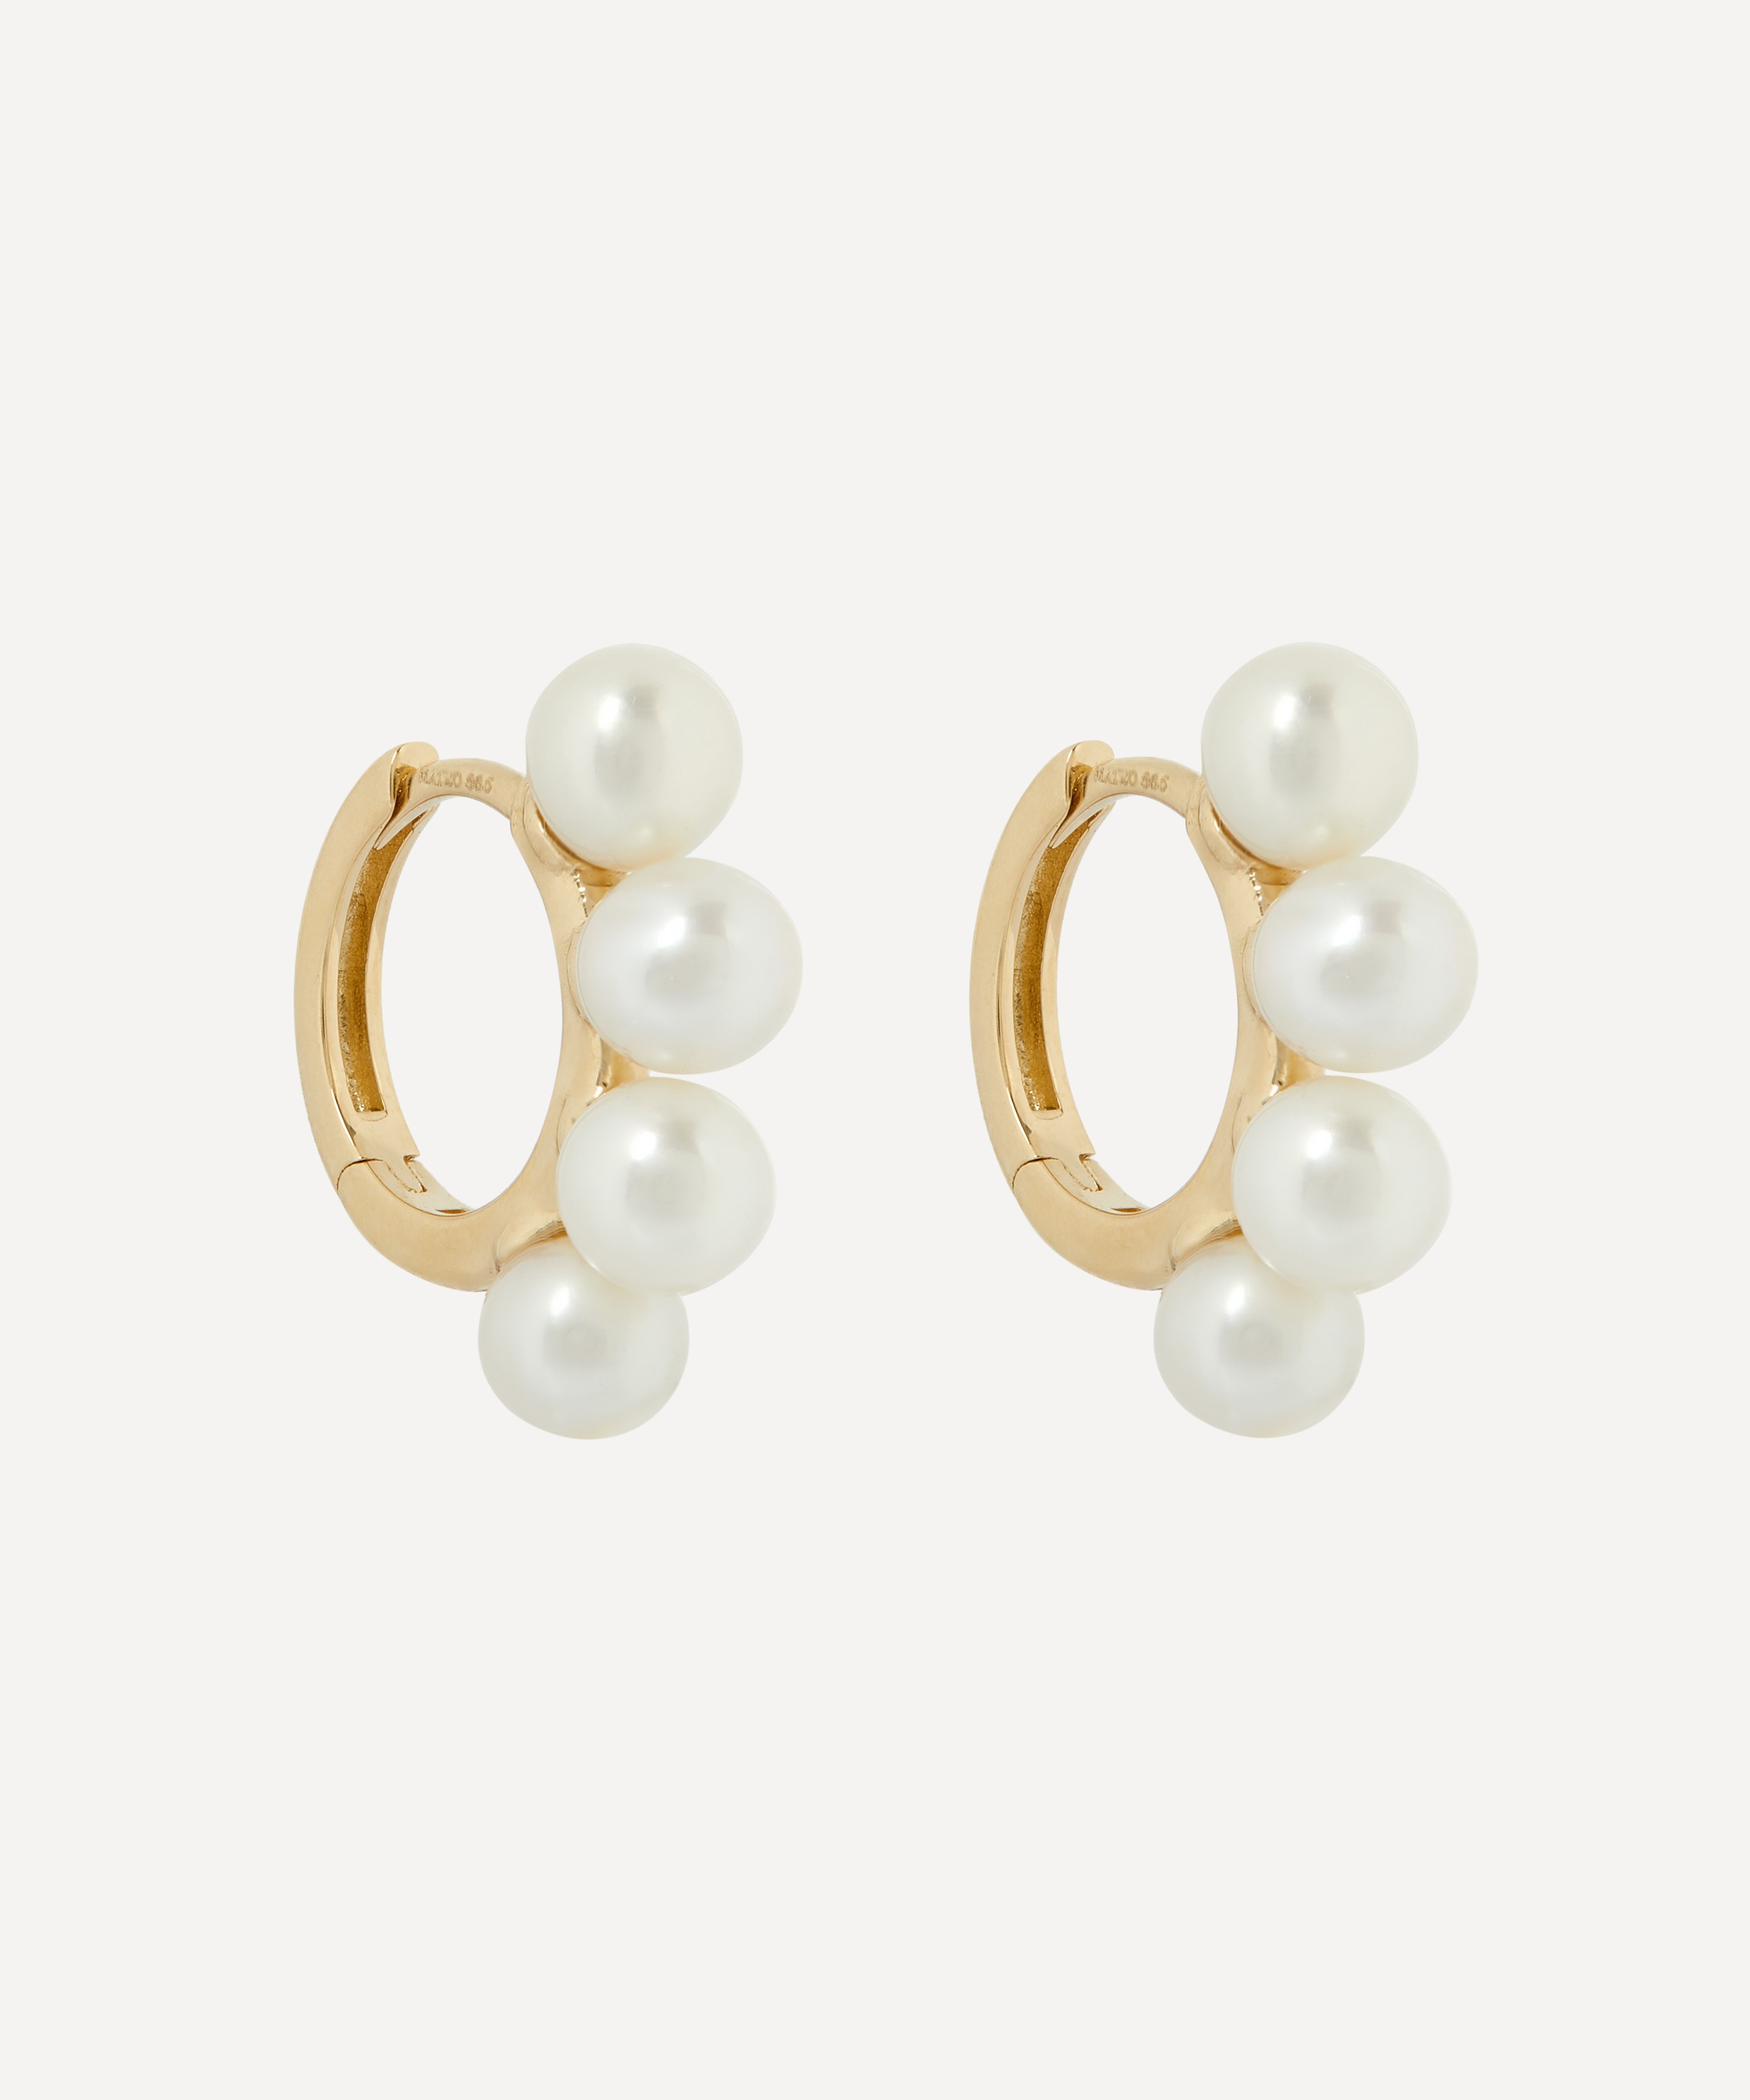 Mateo - 14ct Gold Four Point Pearl Hoop Earrings